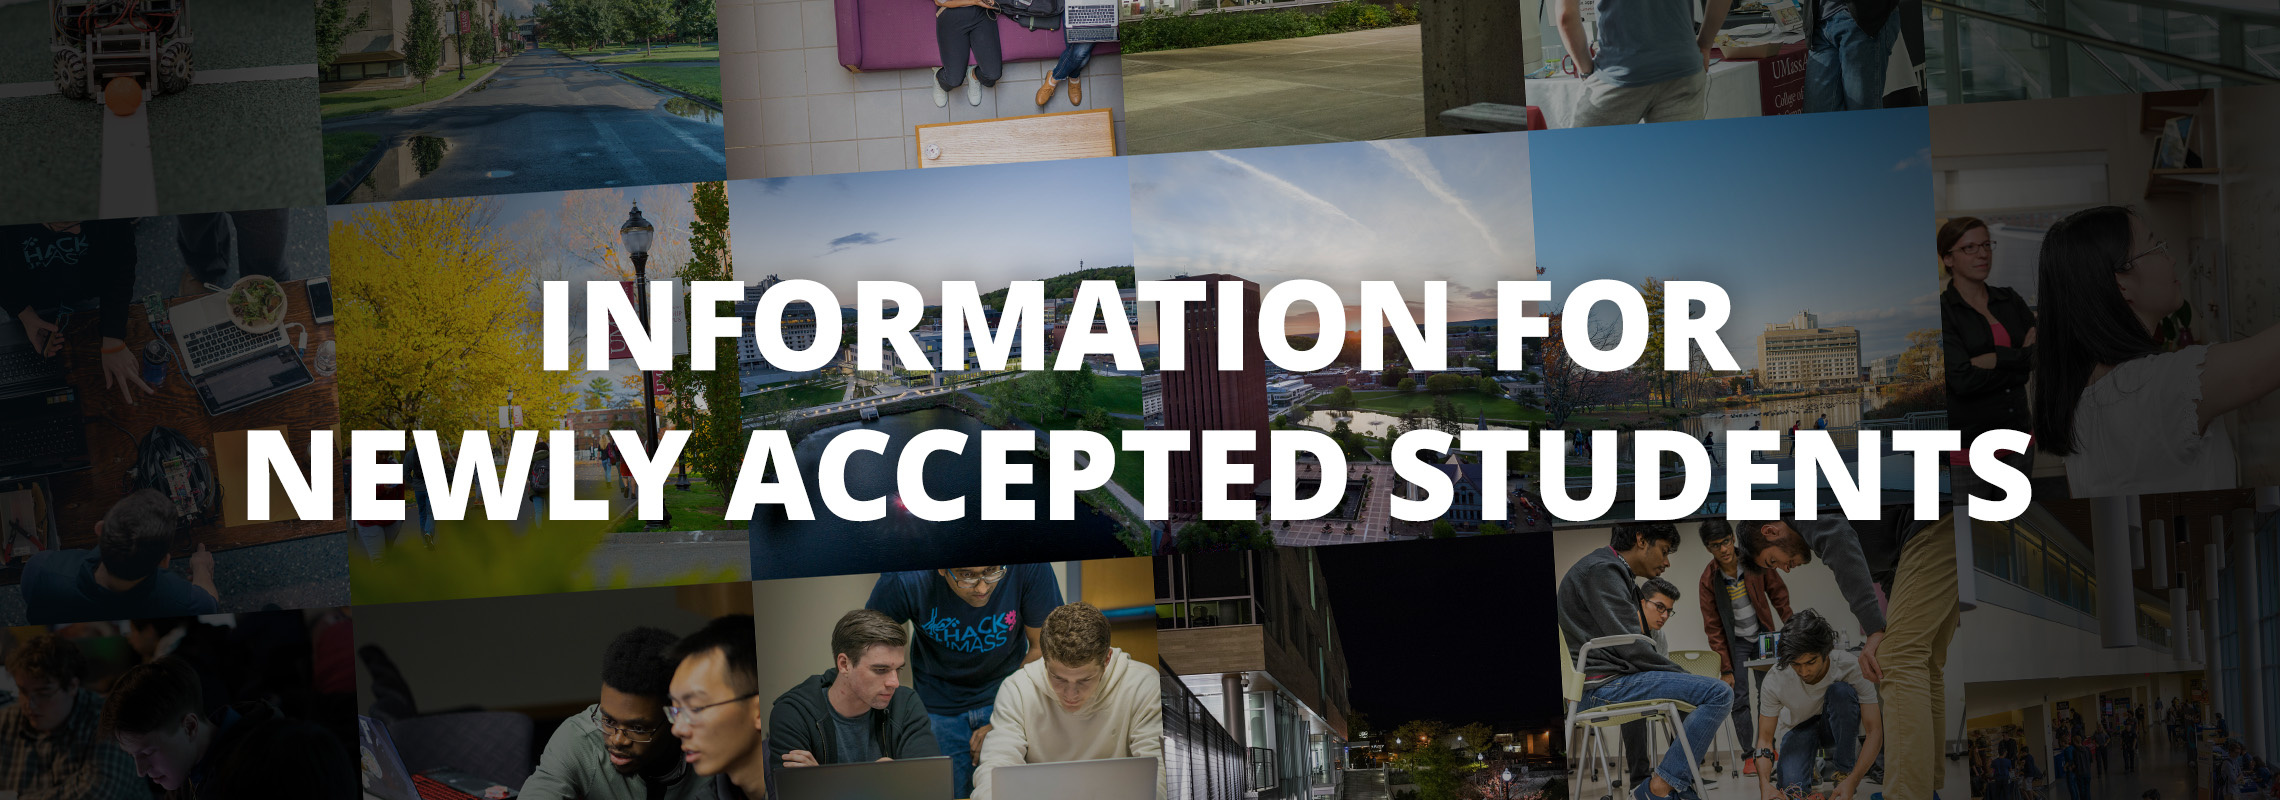 Information for Newly Accepted Students